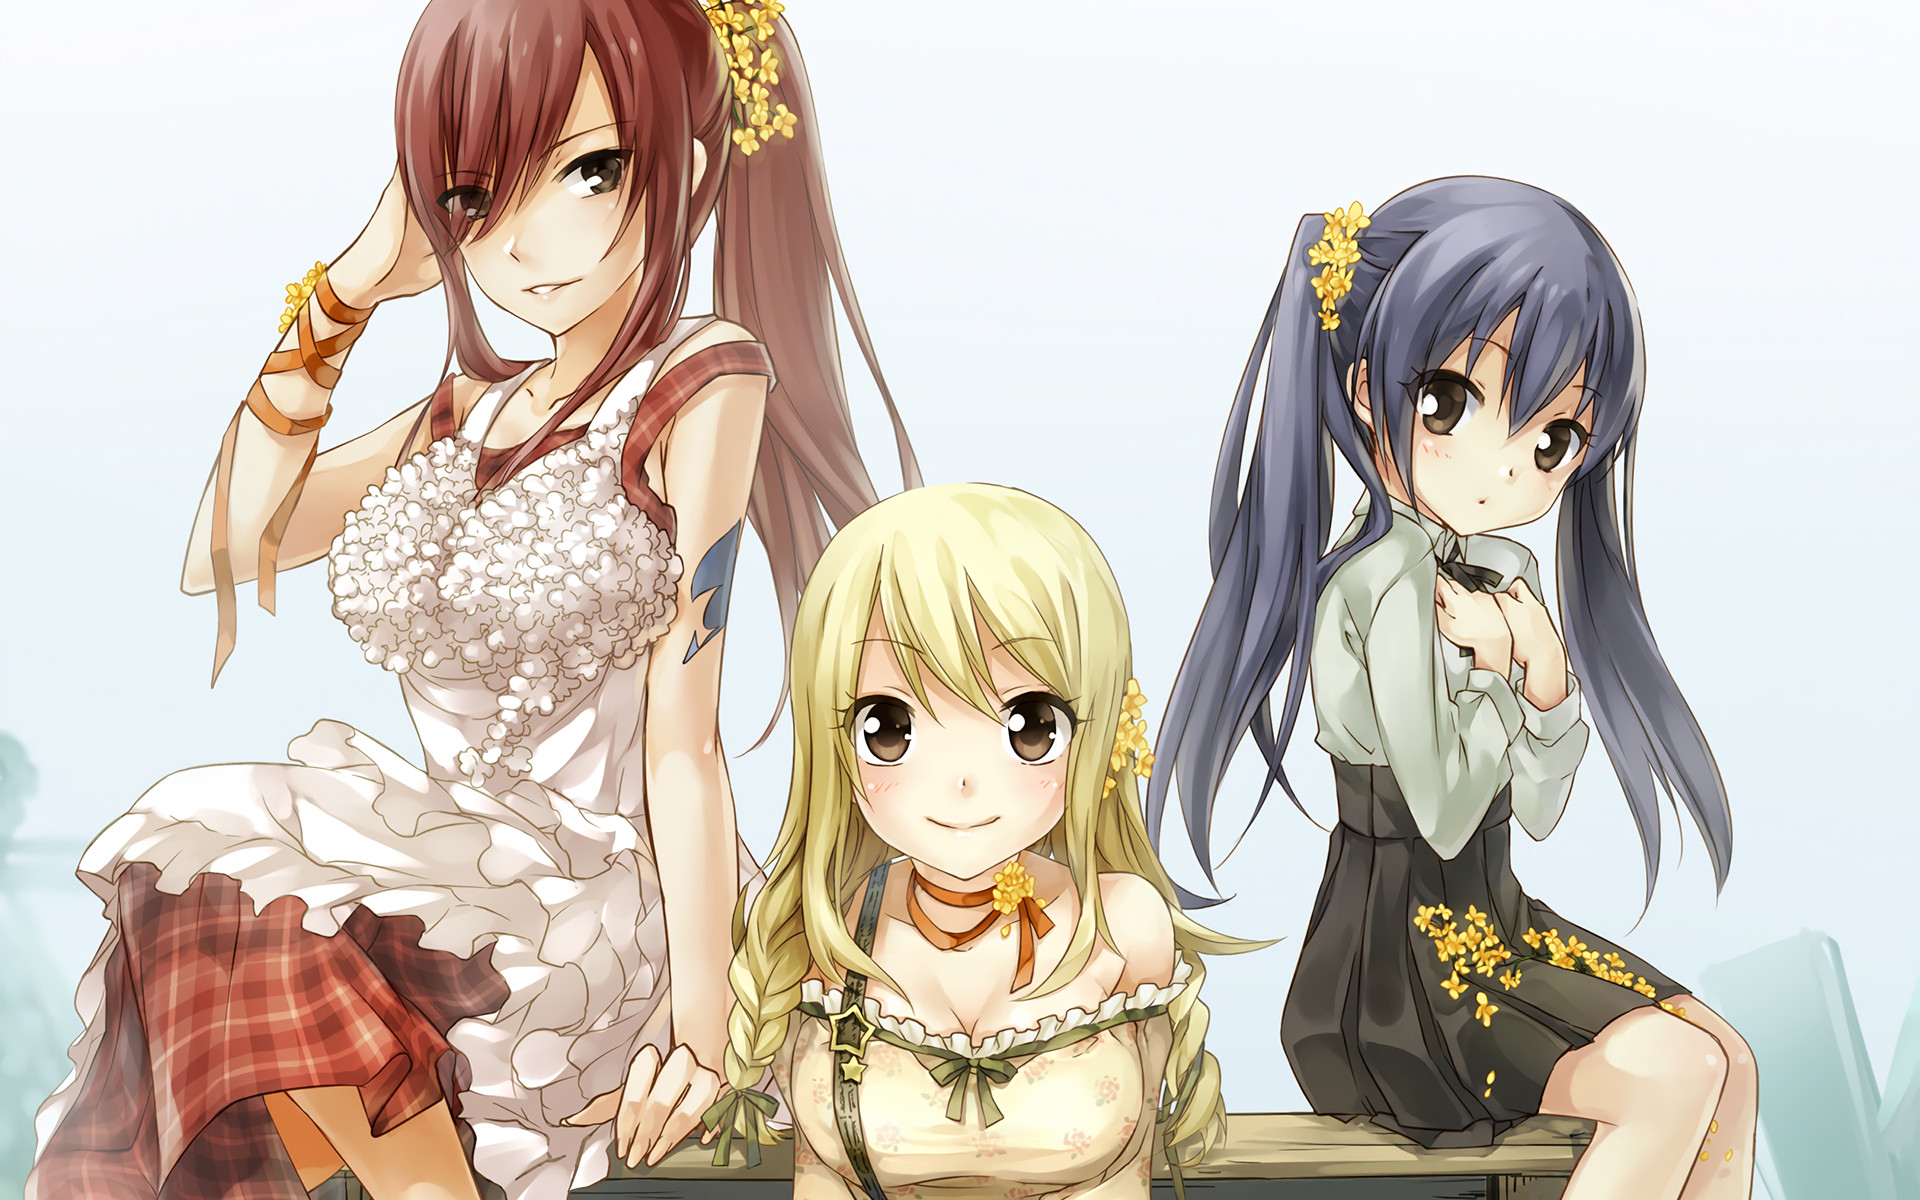 1920x1200 Anime Fairy Tail Erza Scarlet Wendy Marvell Lucy Heartfilia Wallpaper